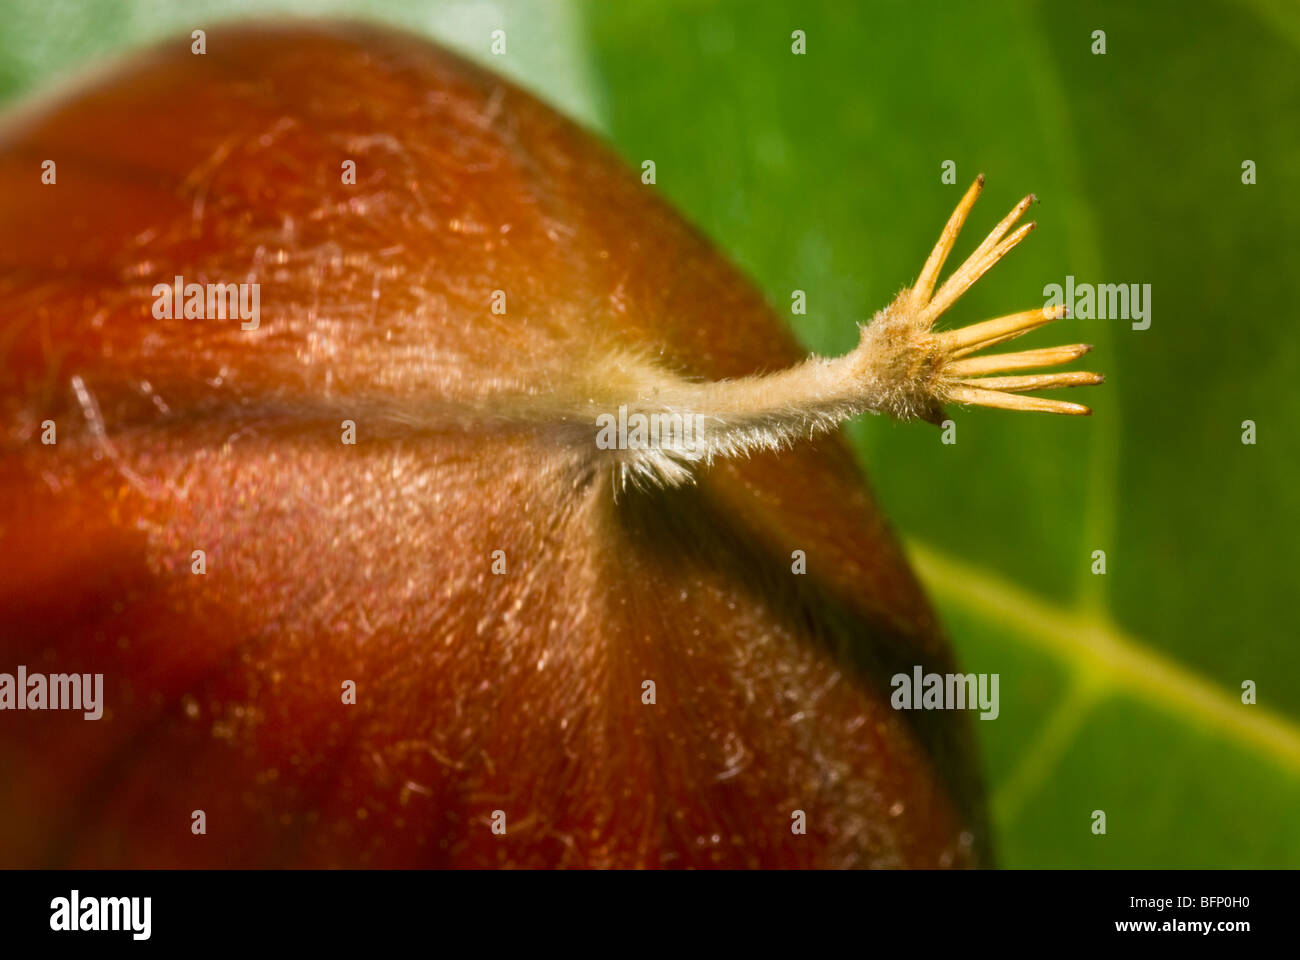 A fine layer of hairs cover the surface of a chestnut in it's pod. Stock Photo